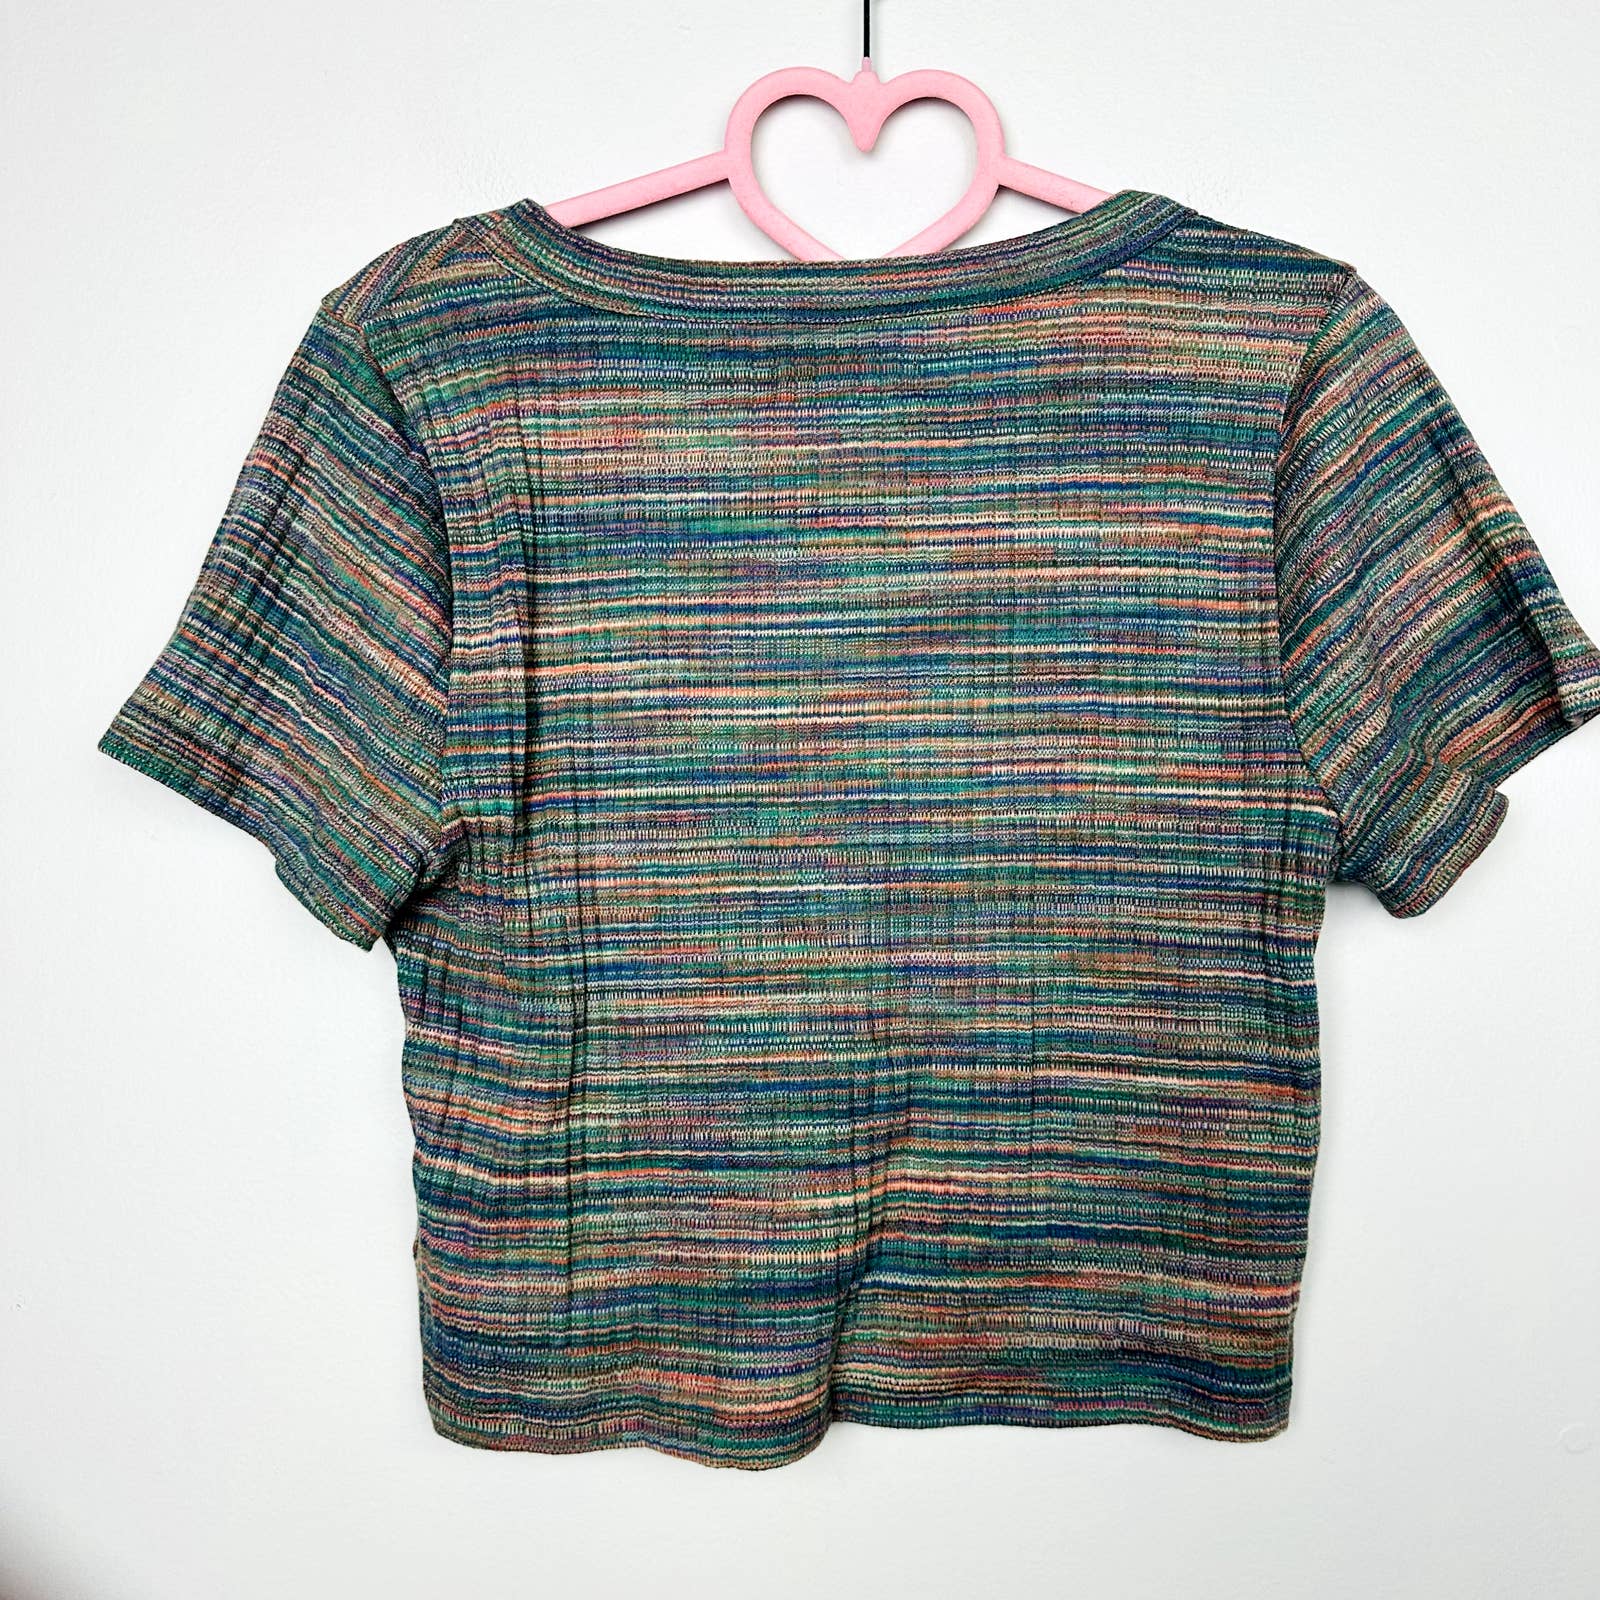 Madewell NWT Rainbow V-Neck Brightside Rib V-Neck Crop Tee in Space-Dye Size Large